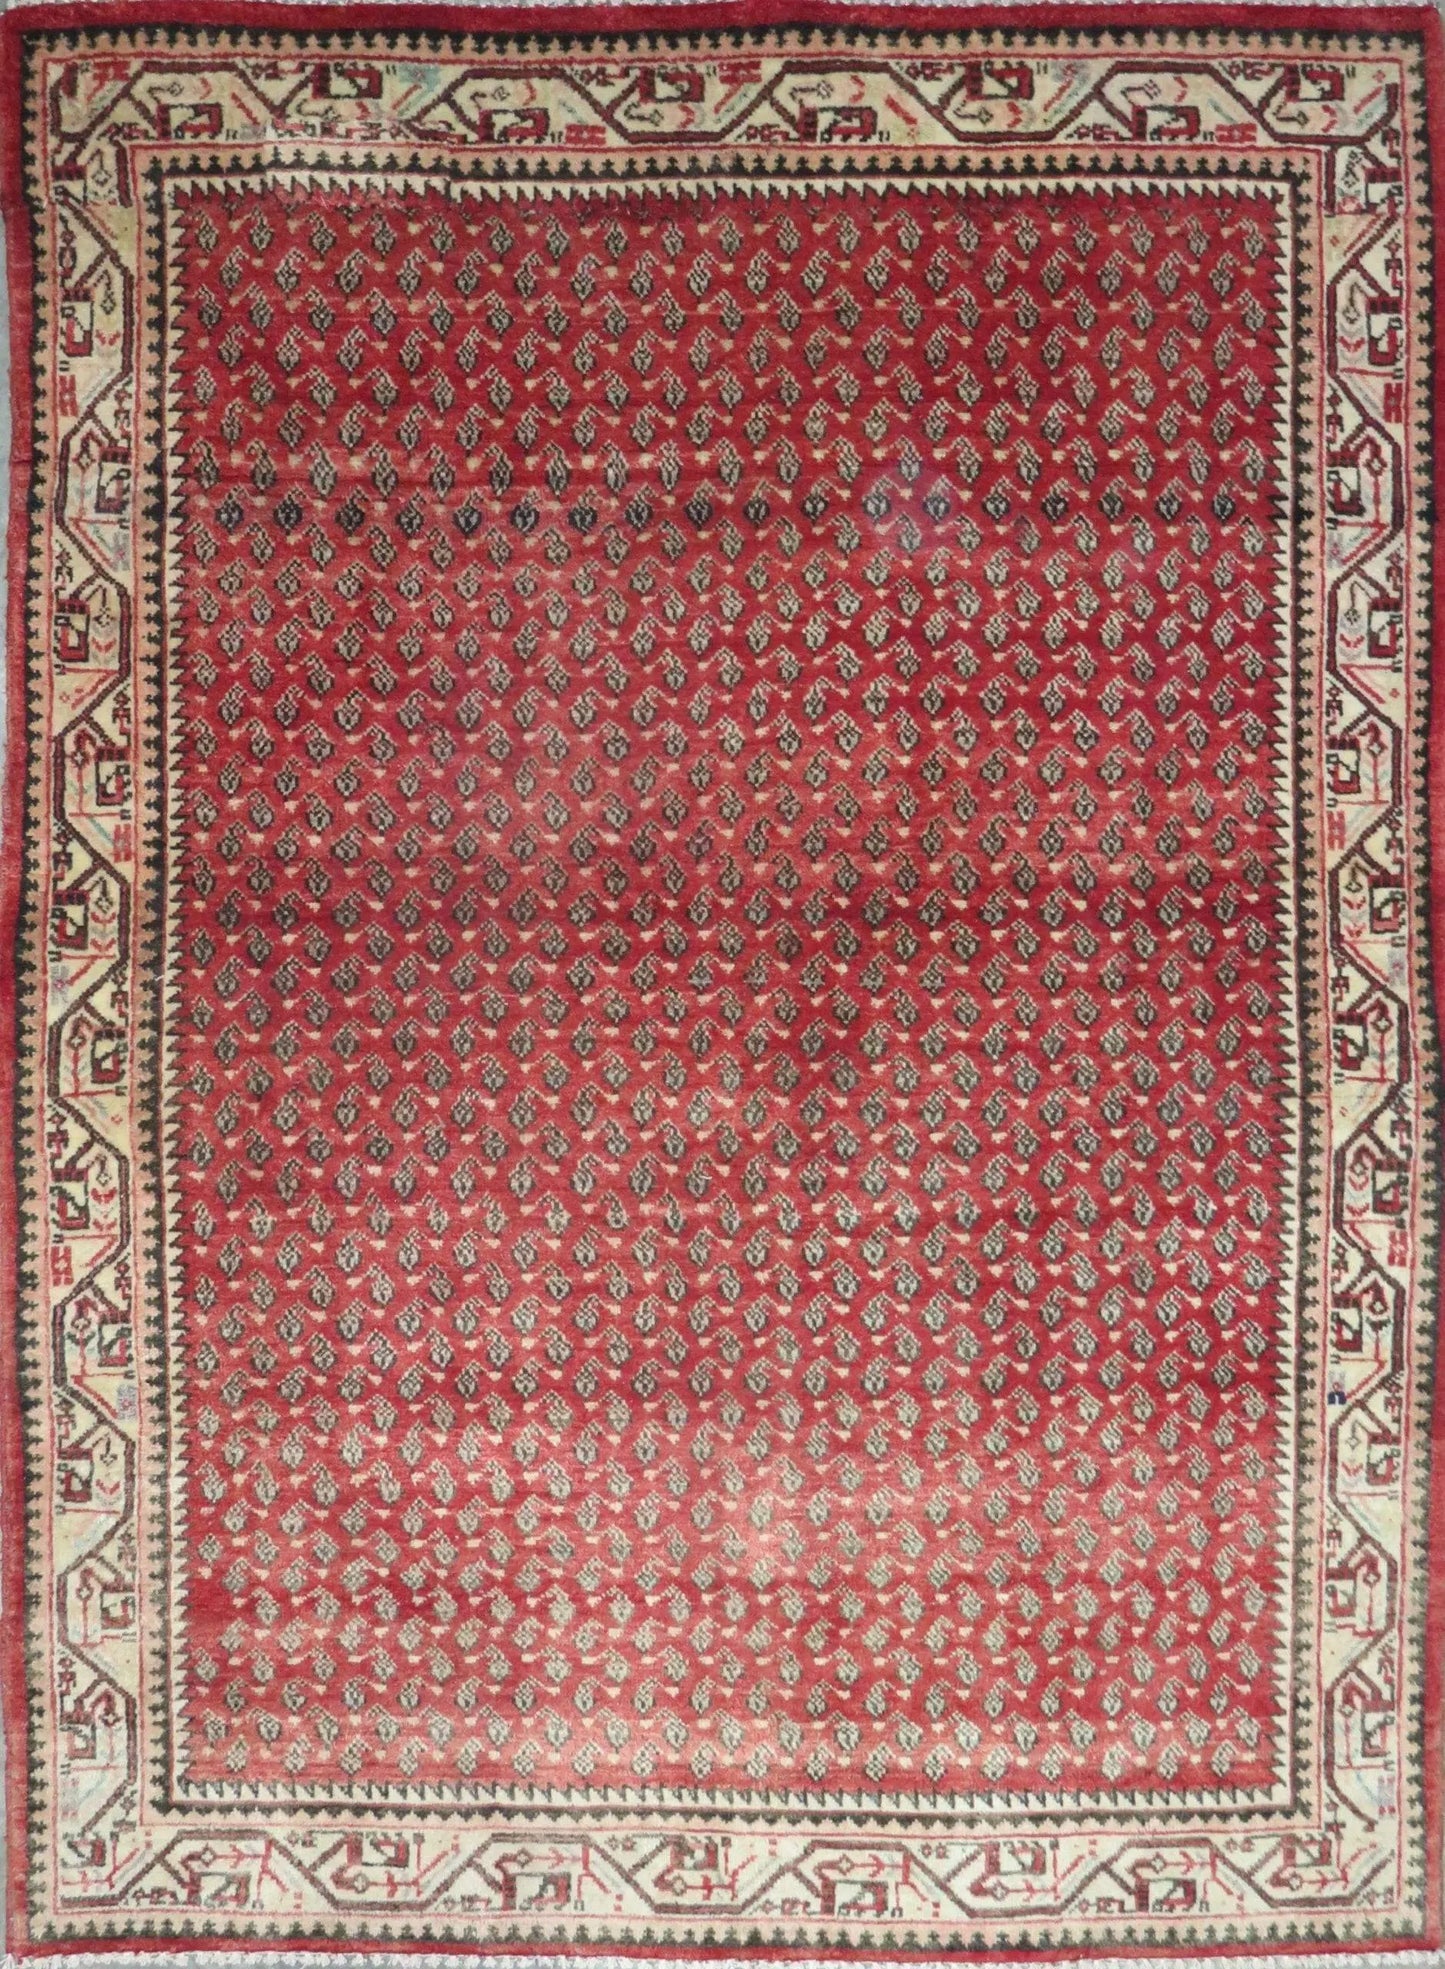 Hand-Knotted Vintage Rug 6'4" x 4'9"